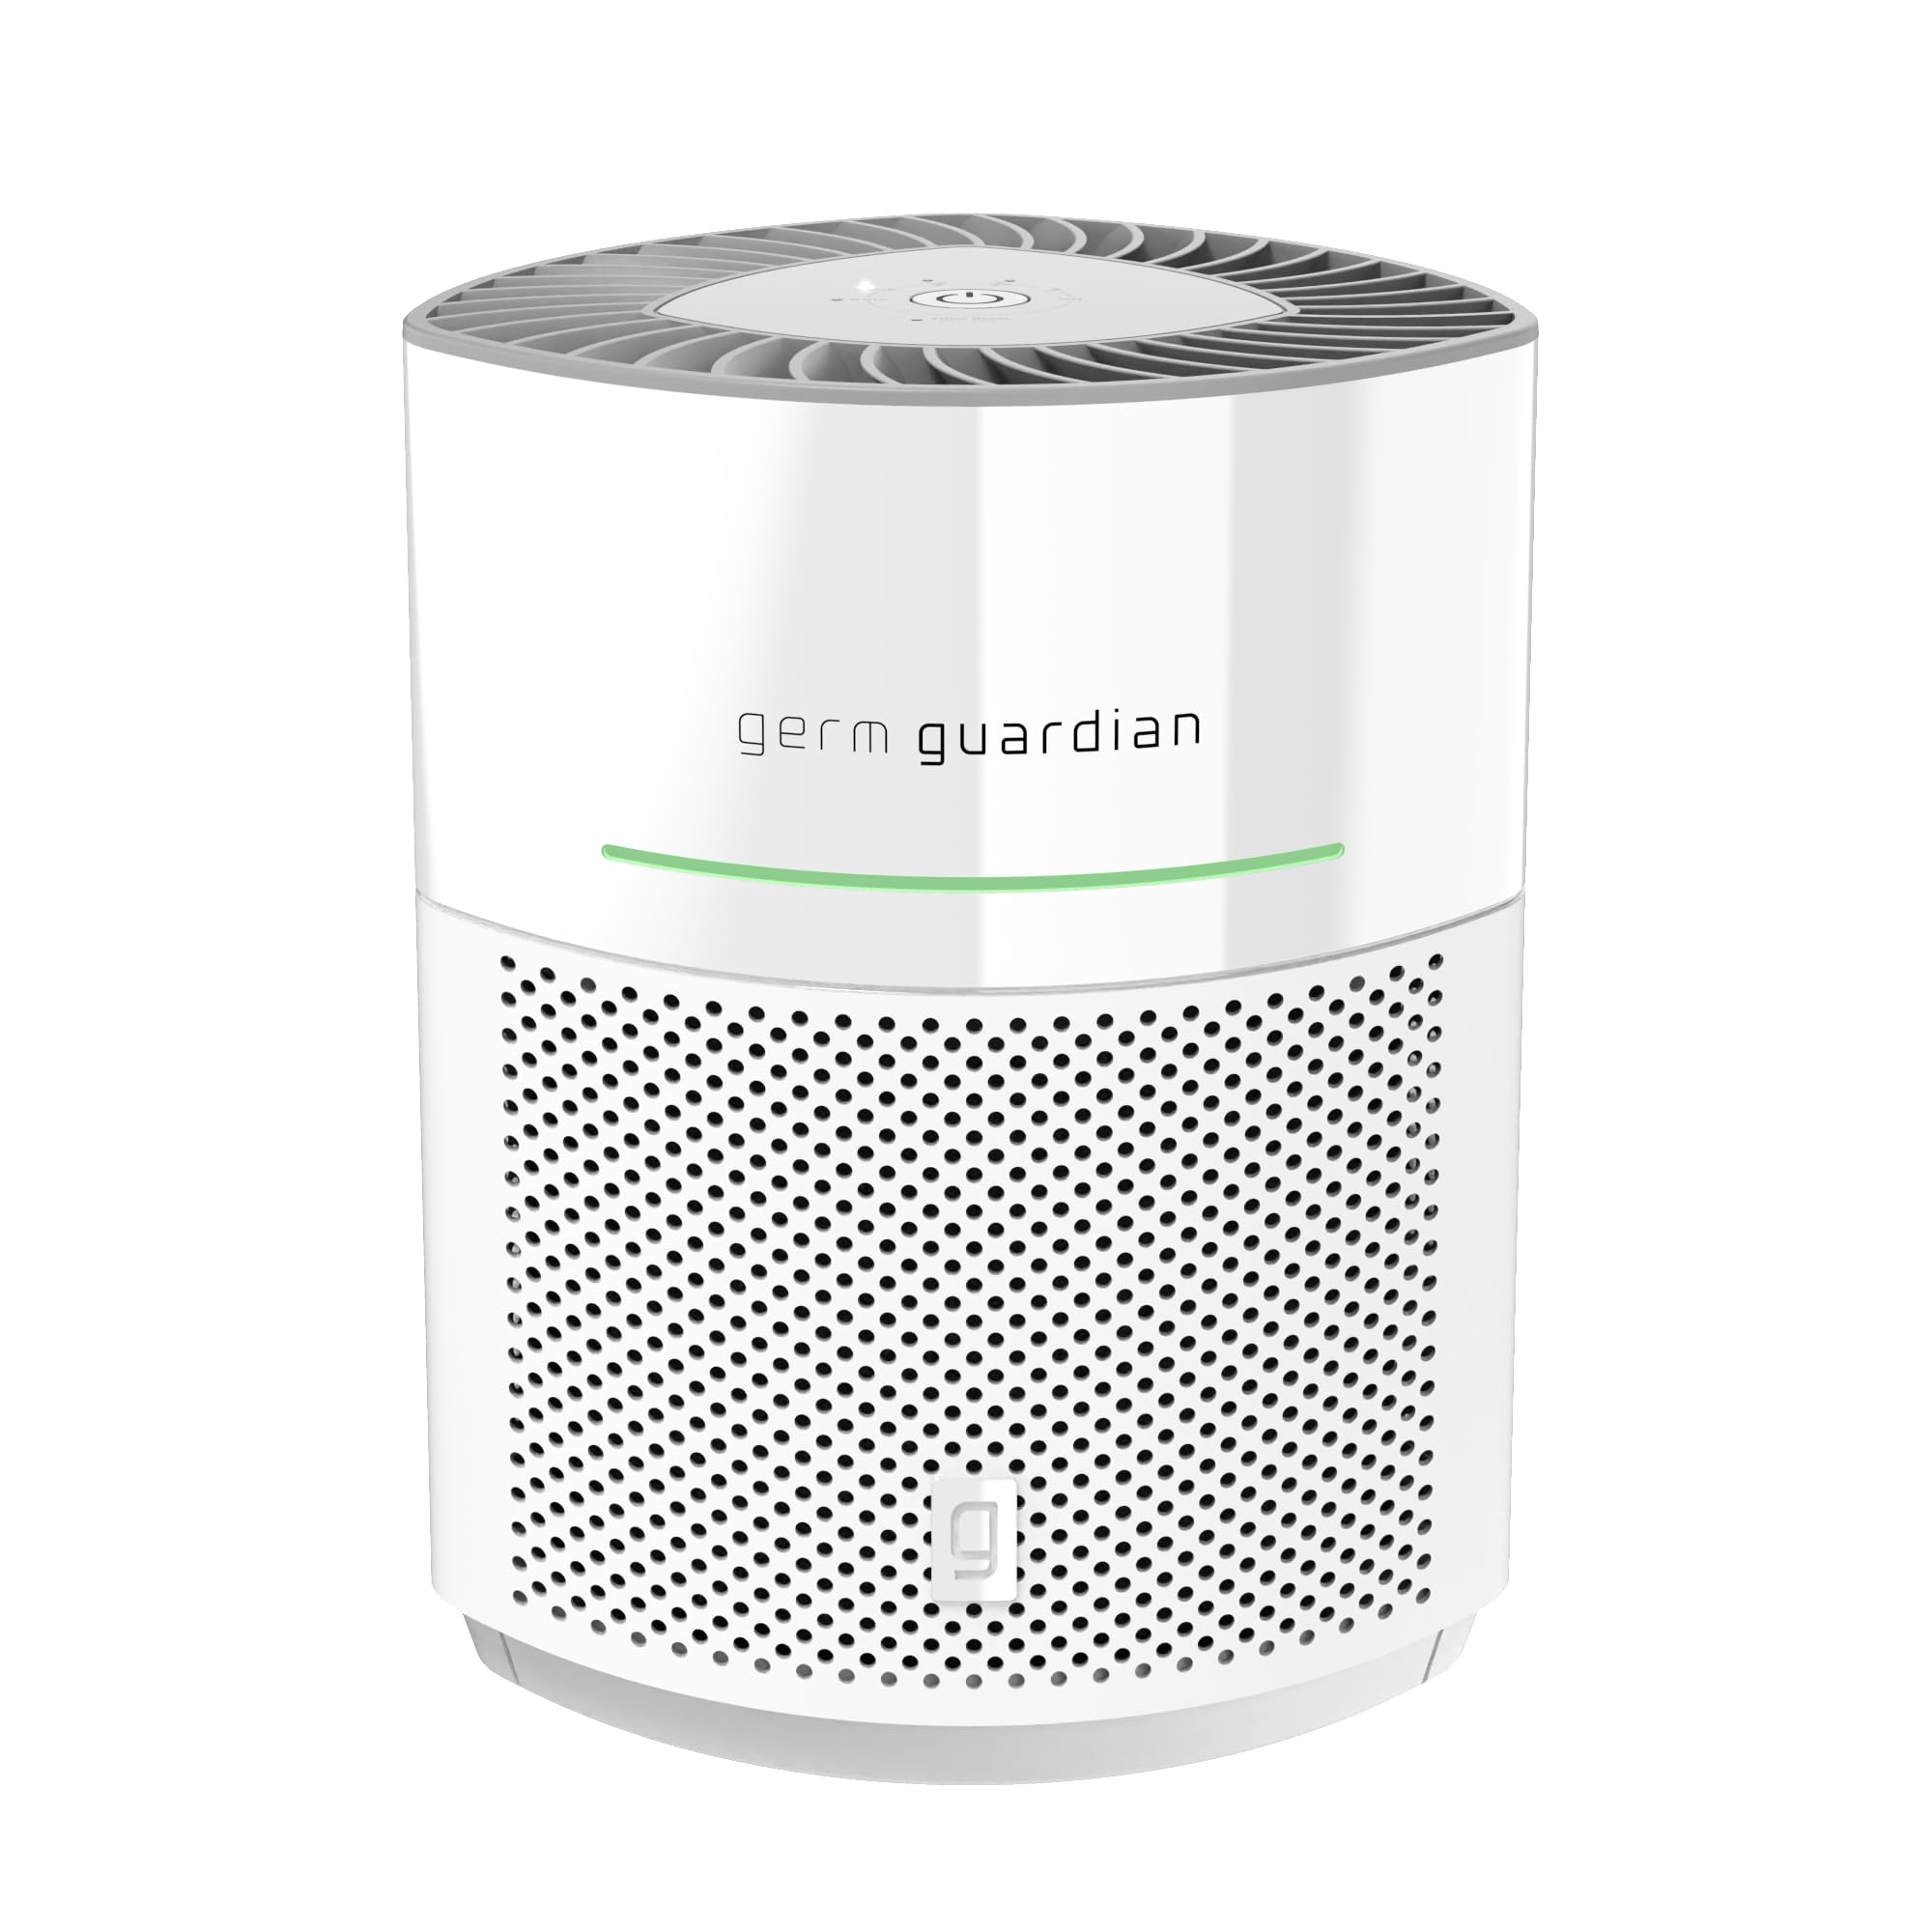 Save 31% $99.99 -> $69.99 GermGuardian Airsafe Intelligent Air Purifier, Air Quality Sensor, 360˚ HEPA Filter, Large Room up to 1040 Sq. Ft., Captures 99.97% of Pollutants